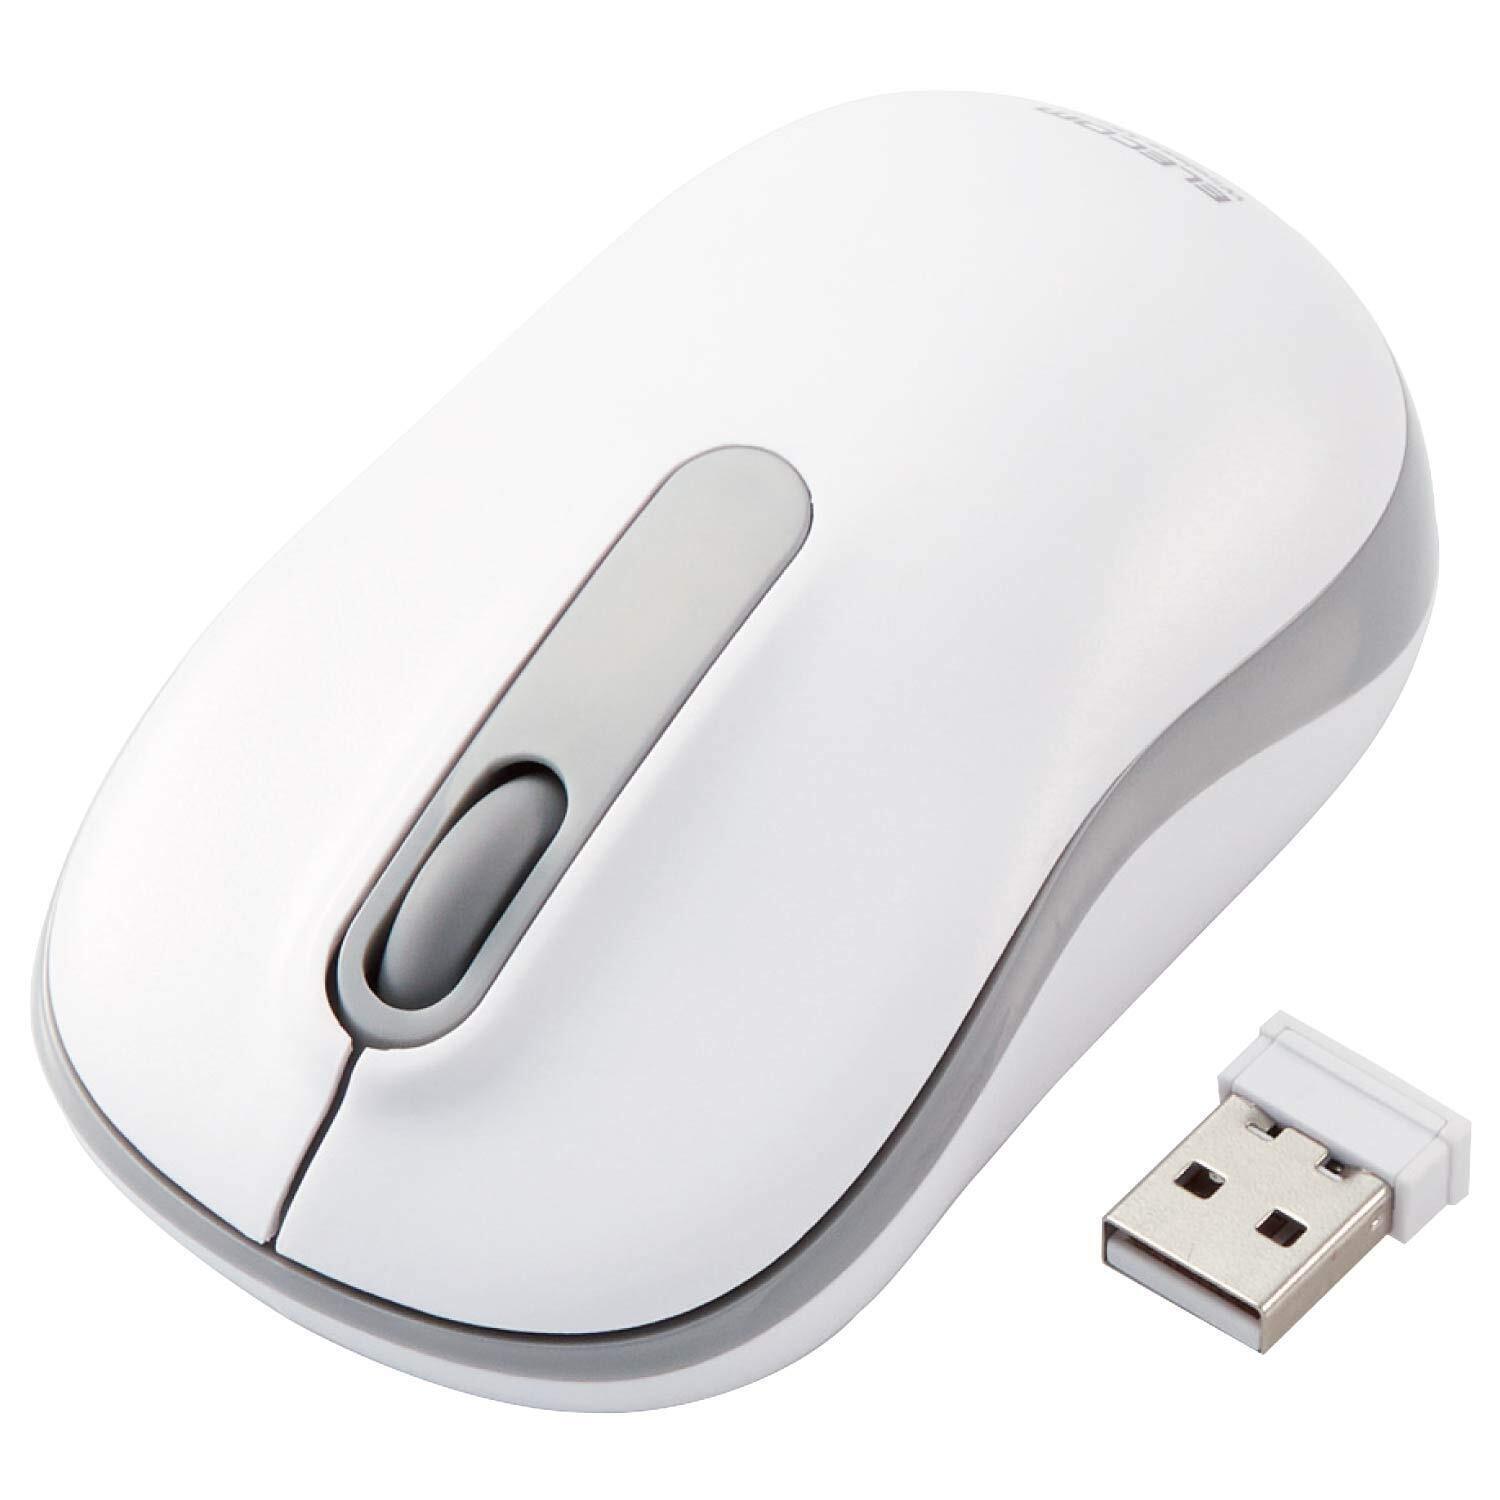 Elecom Wireless Mouse Quiet Antibacterial 3Button MSize white